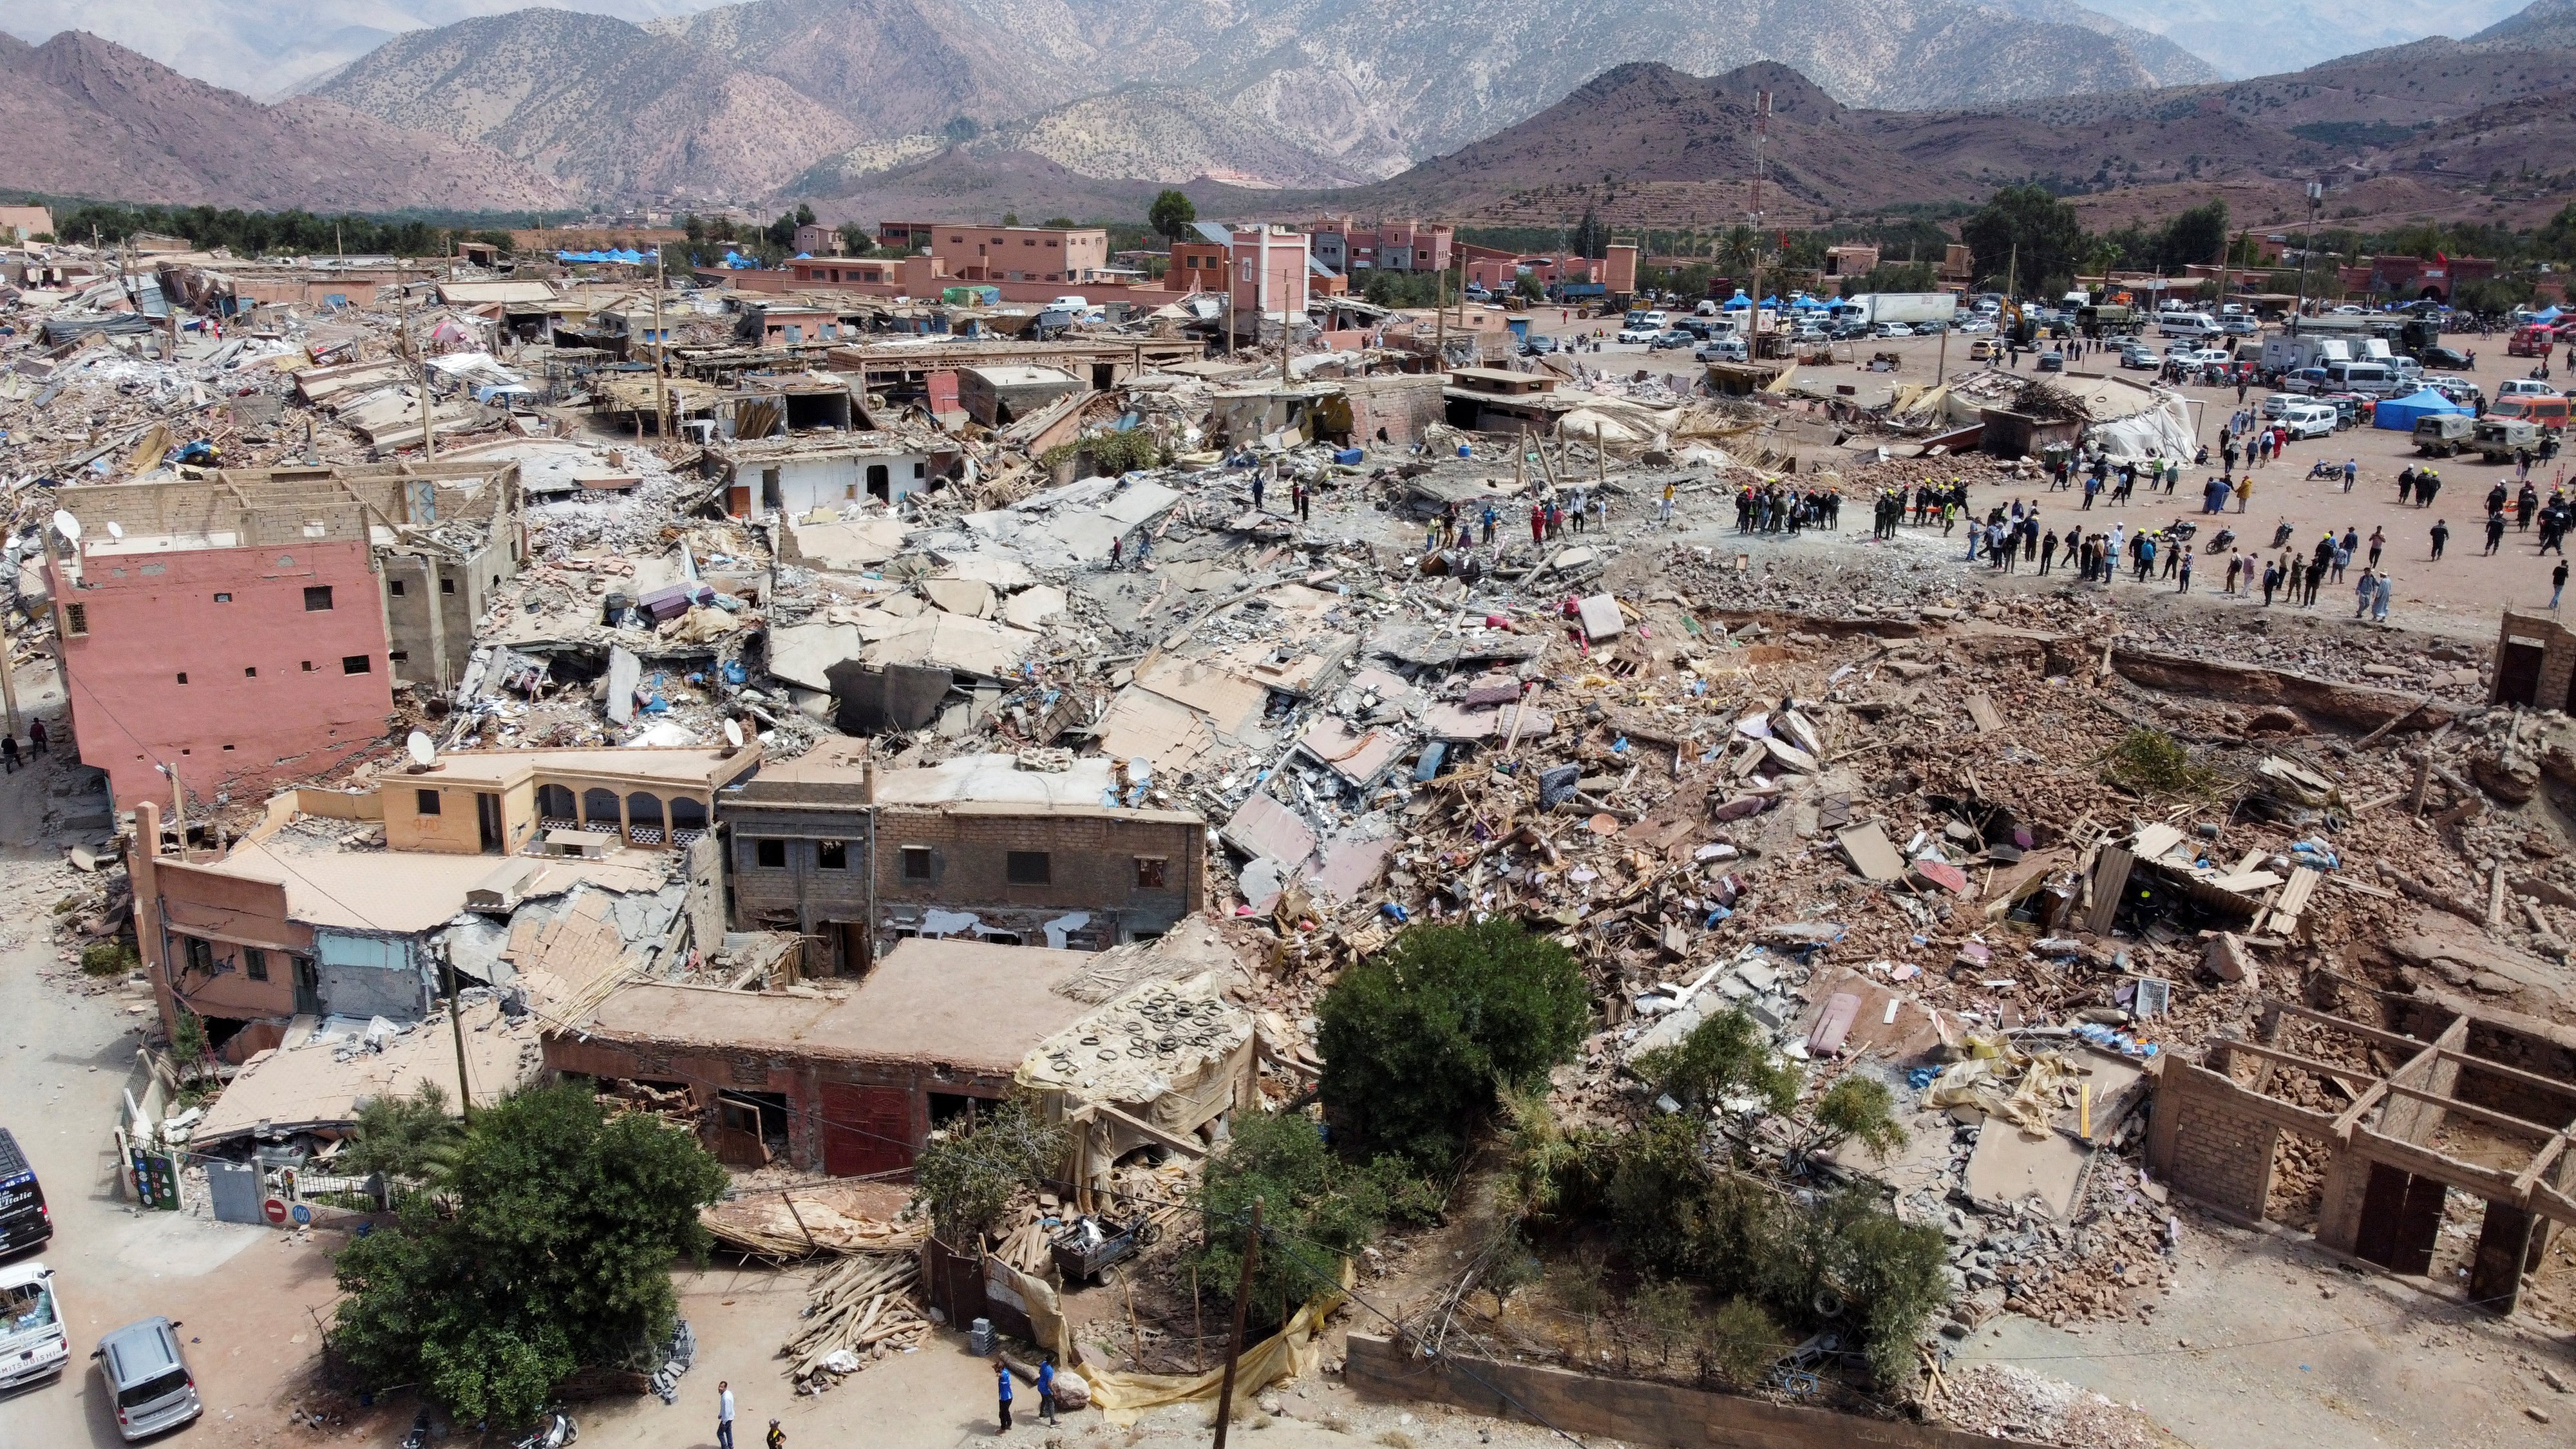 Misinformation in the wake of a disaster: Morocco earthquake fact check roundup